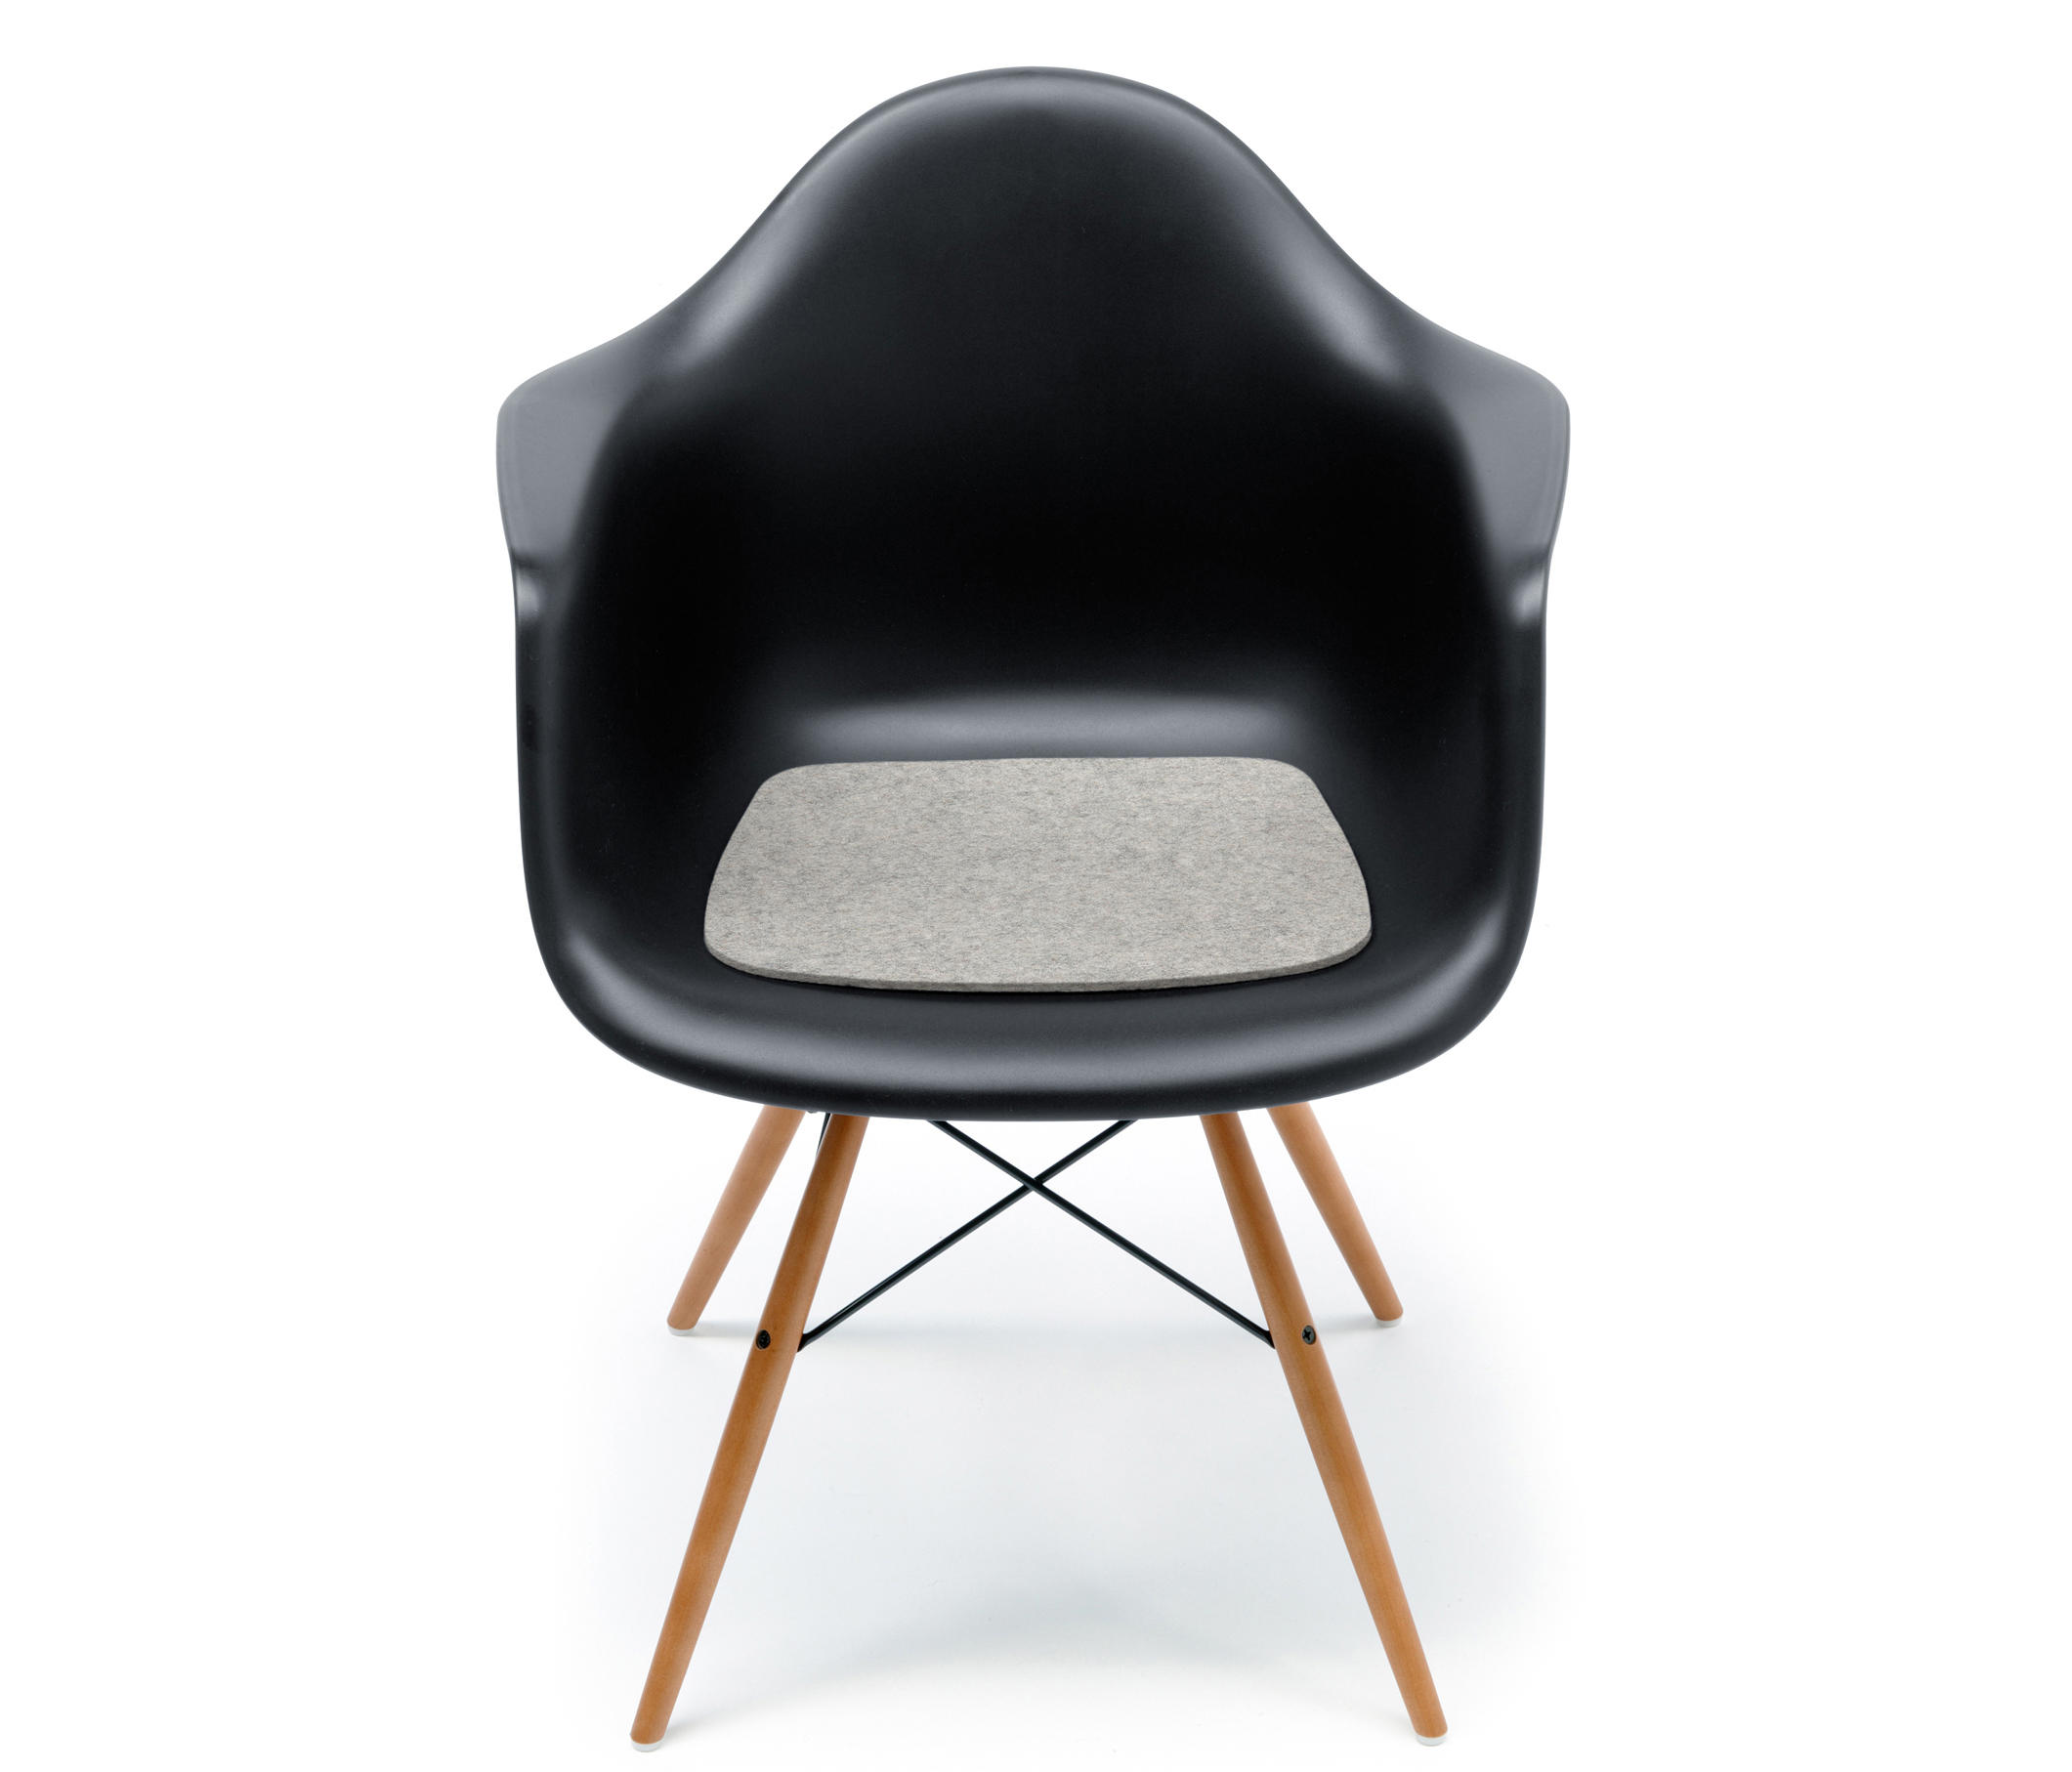 Seat Cushion for Eames Style Dining Chair and Armchair